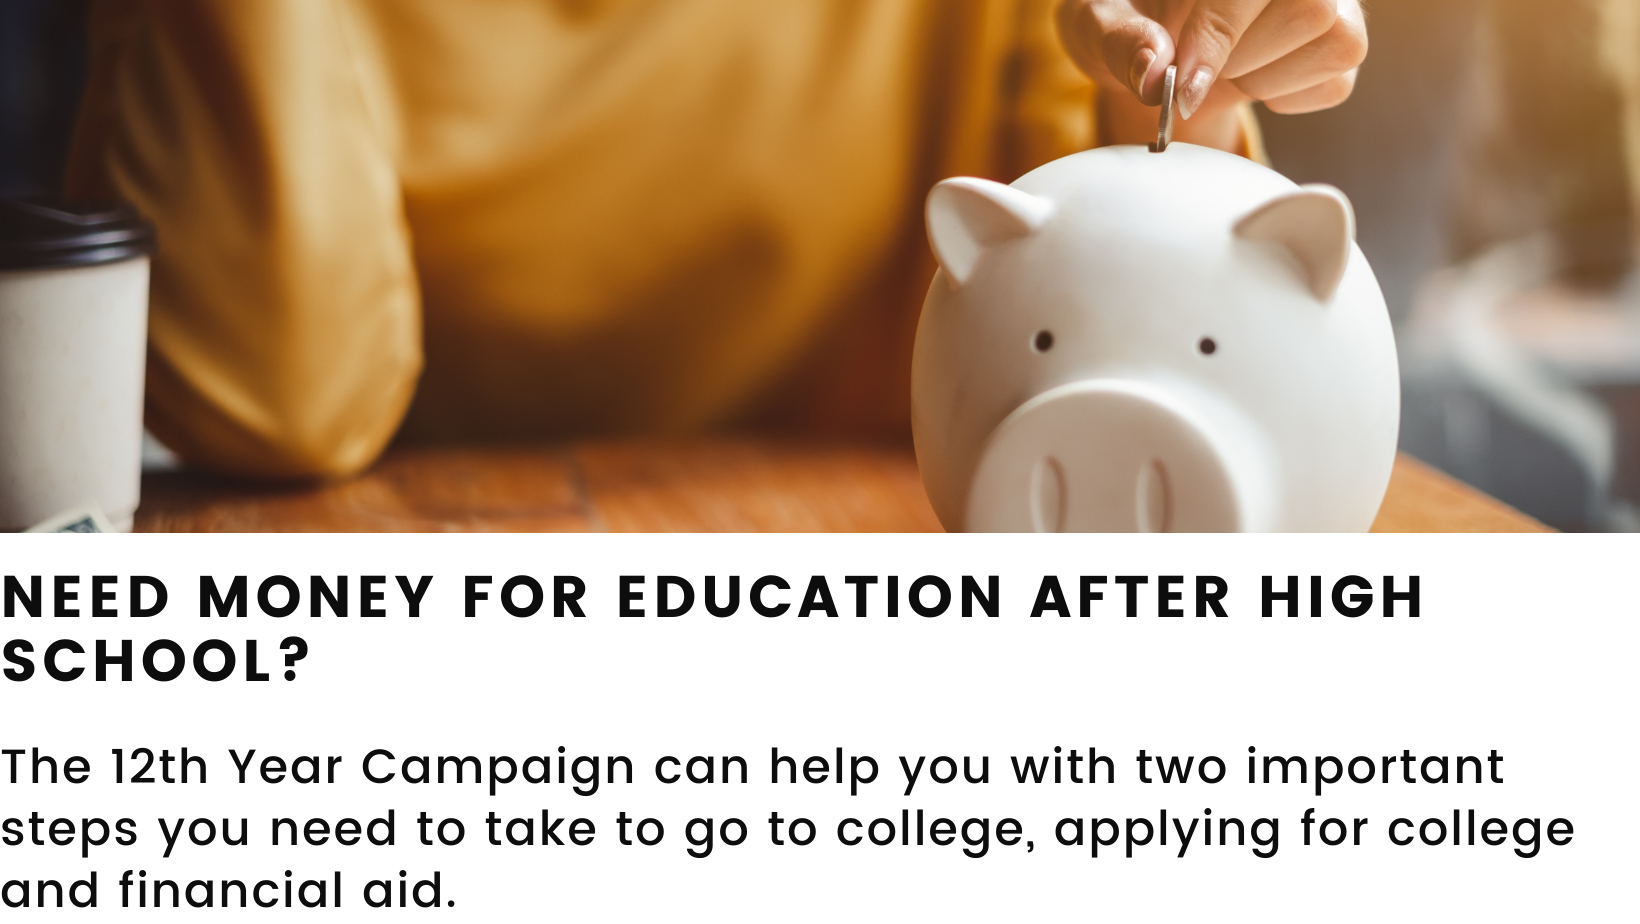 Image featuring a piggy bank. Header: Need money for education after high school? Body: The 12th Year Campaign can help you with two important steps you need to take to go to college, applying for college and financial aid.